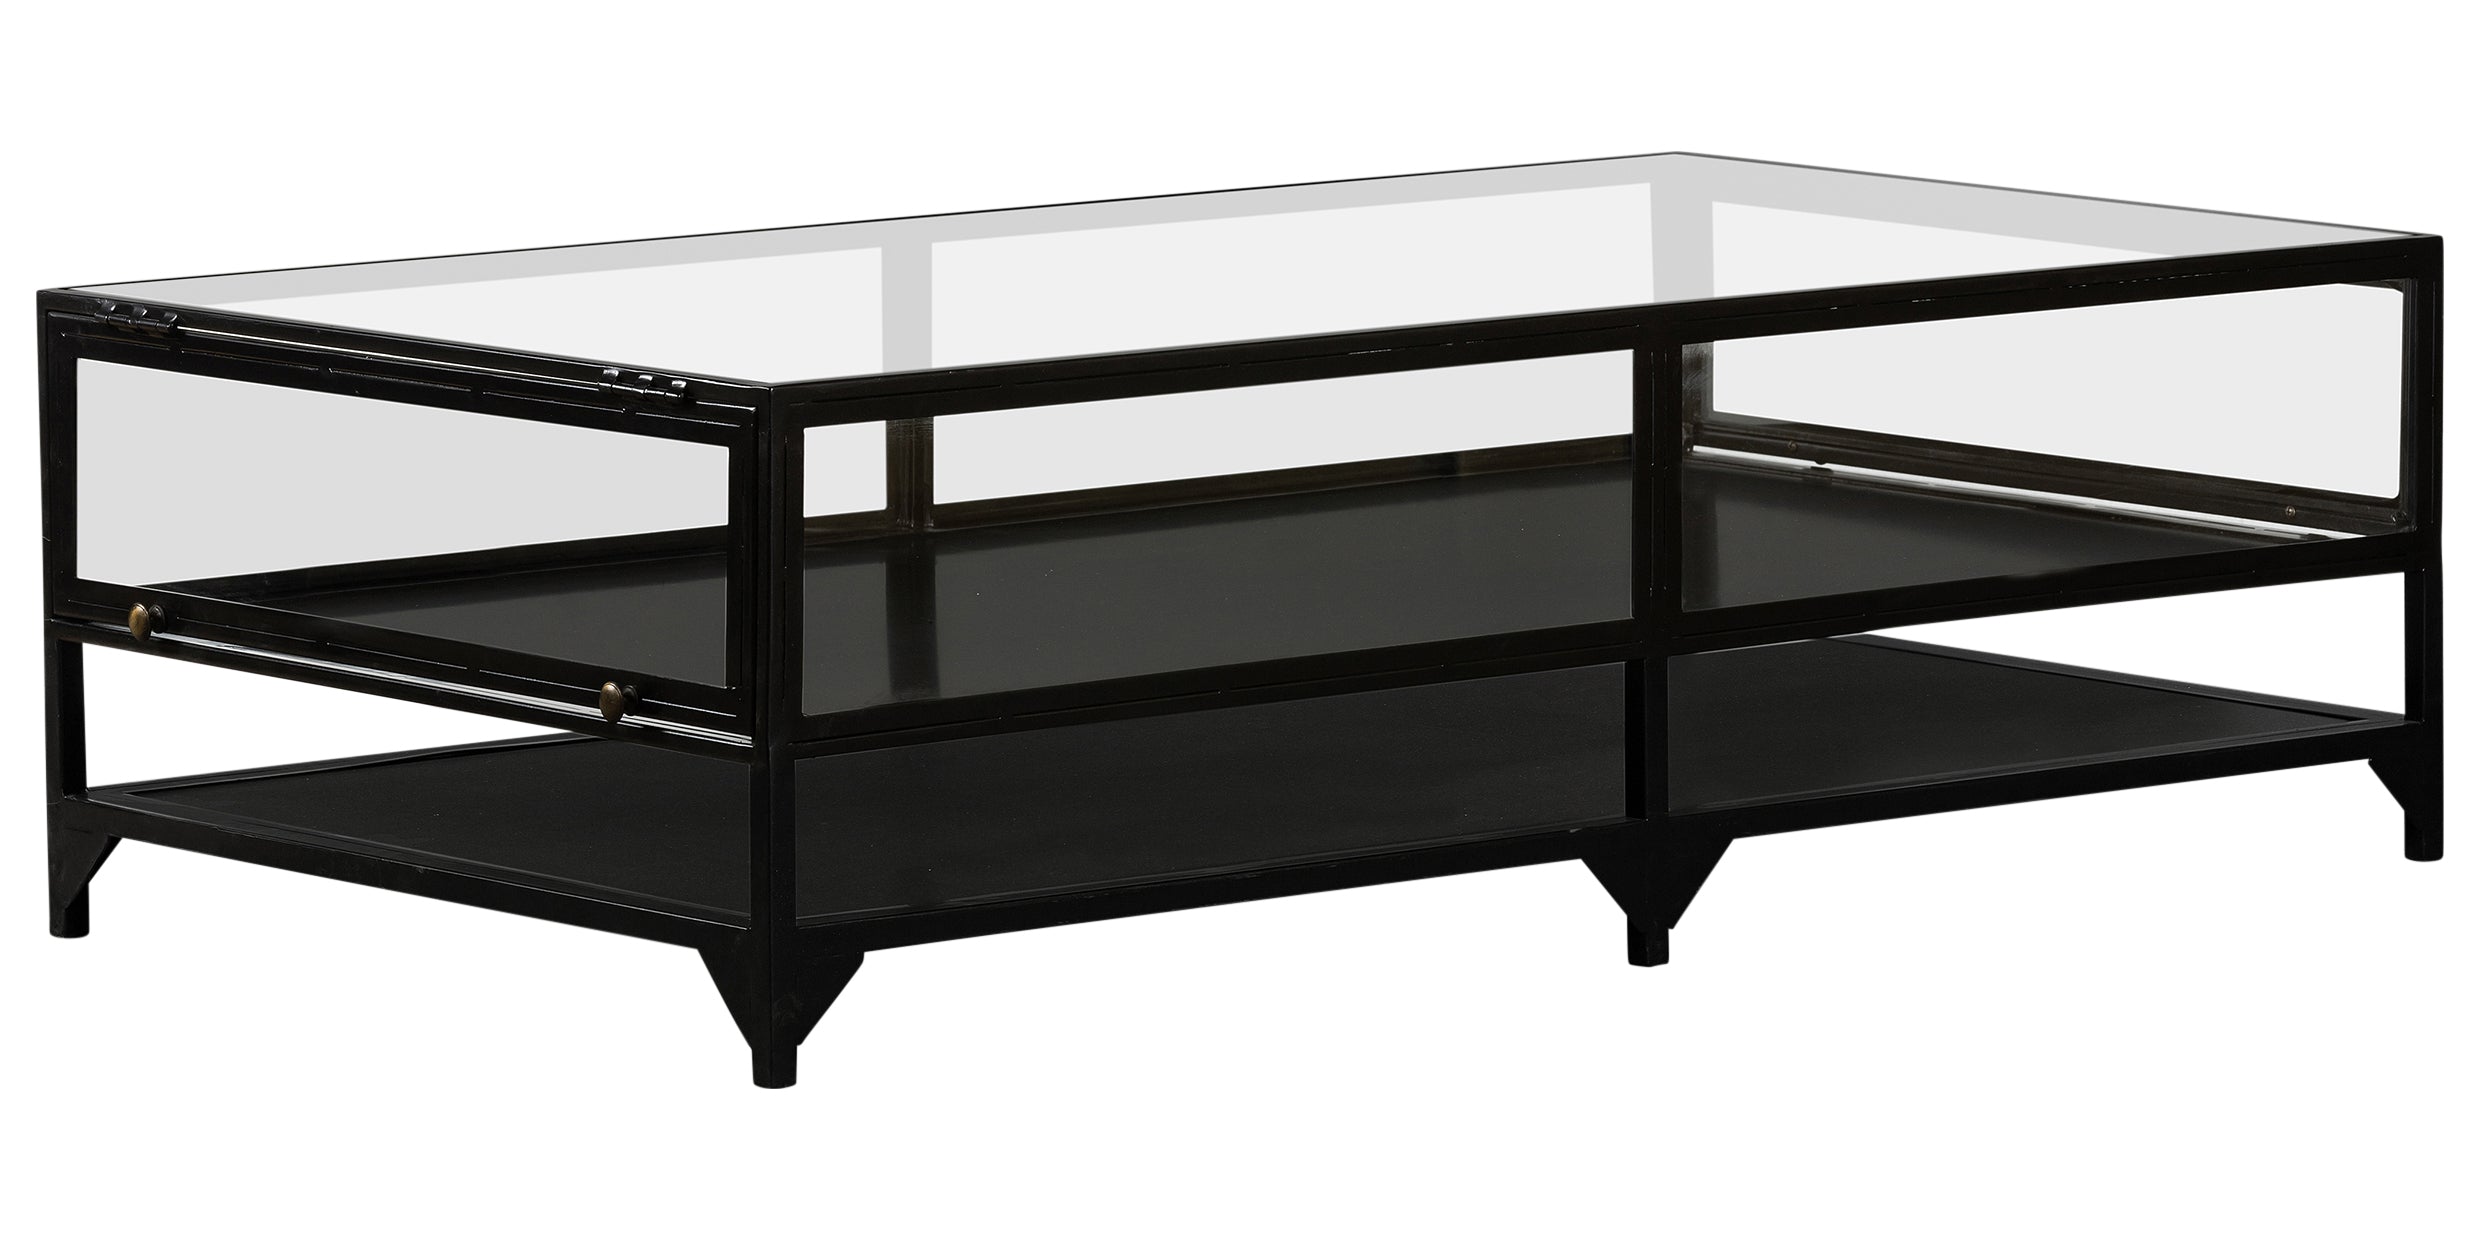 Black Iron with Tempered Glass | Shadow Box Coffee Table | Valley Ridge Furniture